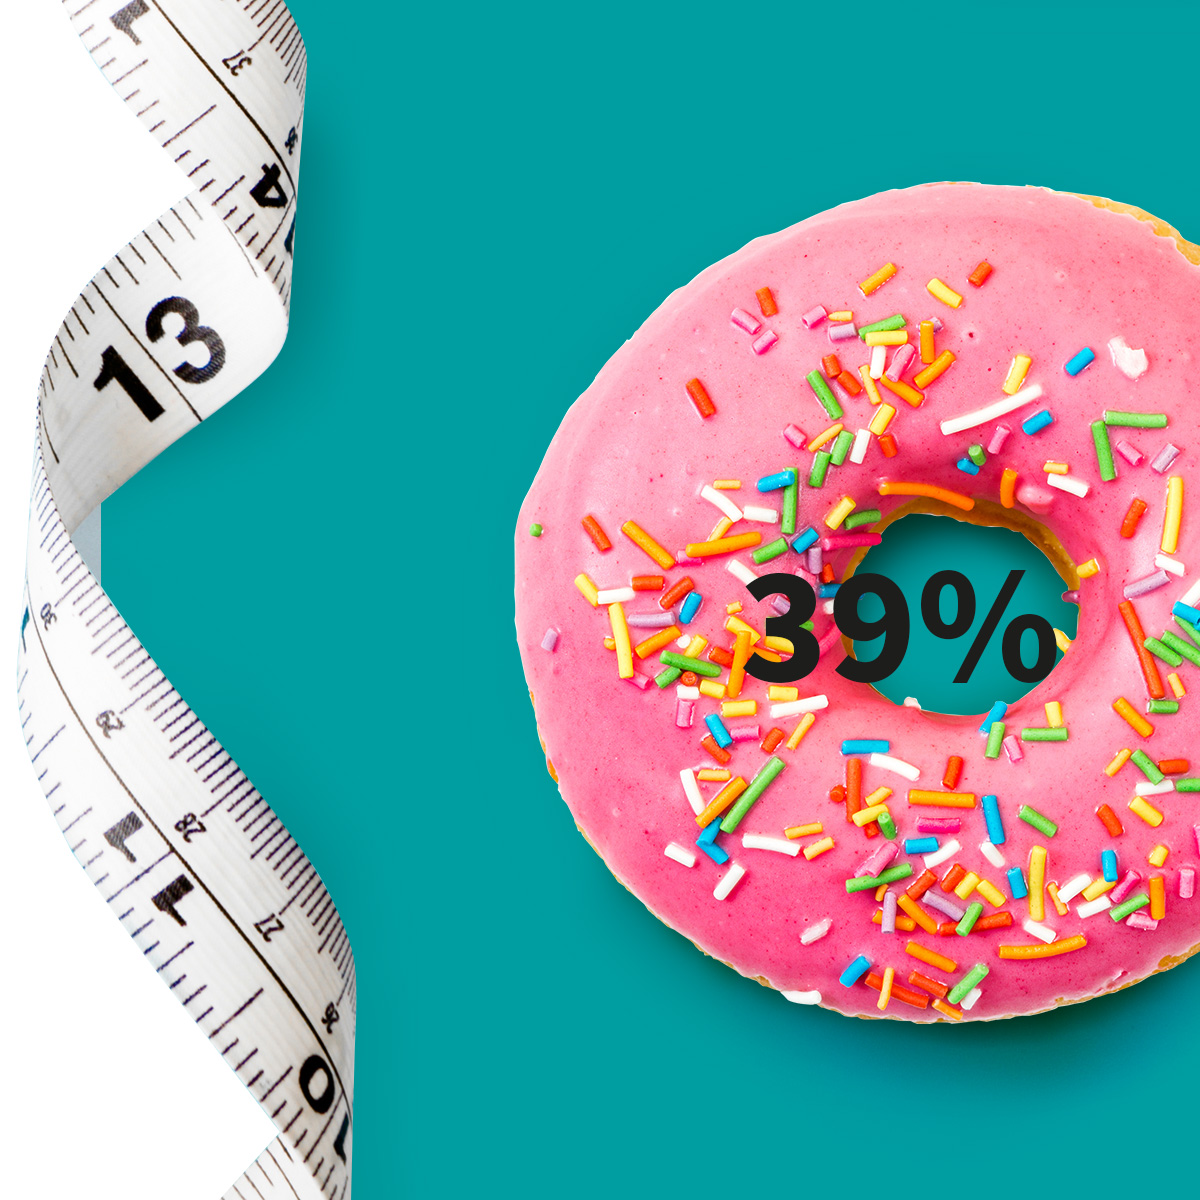 [.FR-fr France (french)] •	A measuring tape and a doughnut with pink icing and colourful sugar sprinkle as a metaphor for obesity